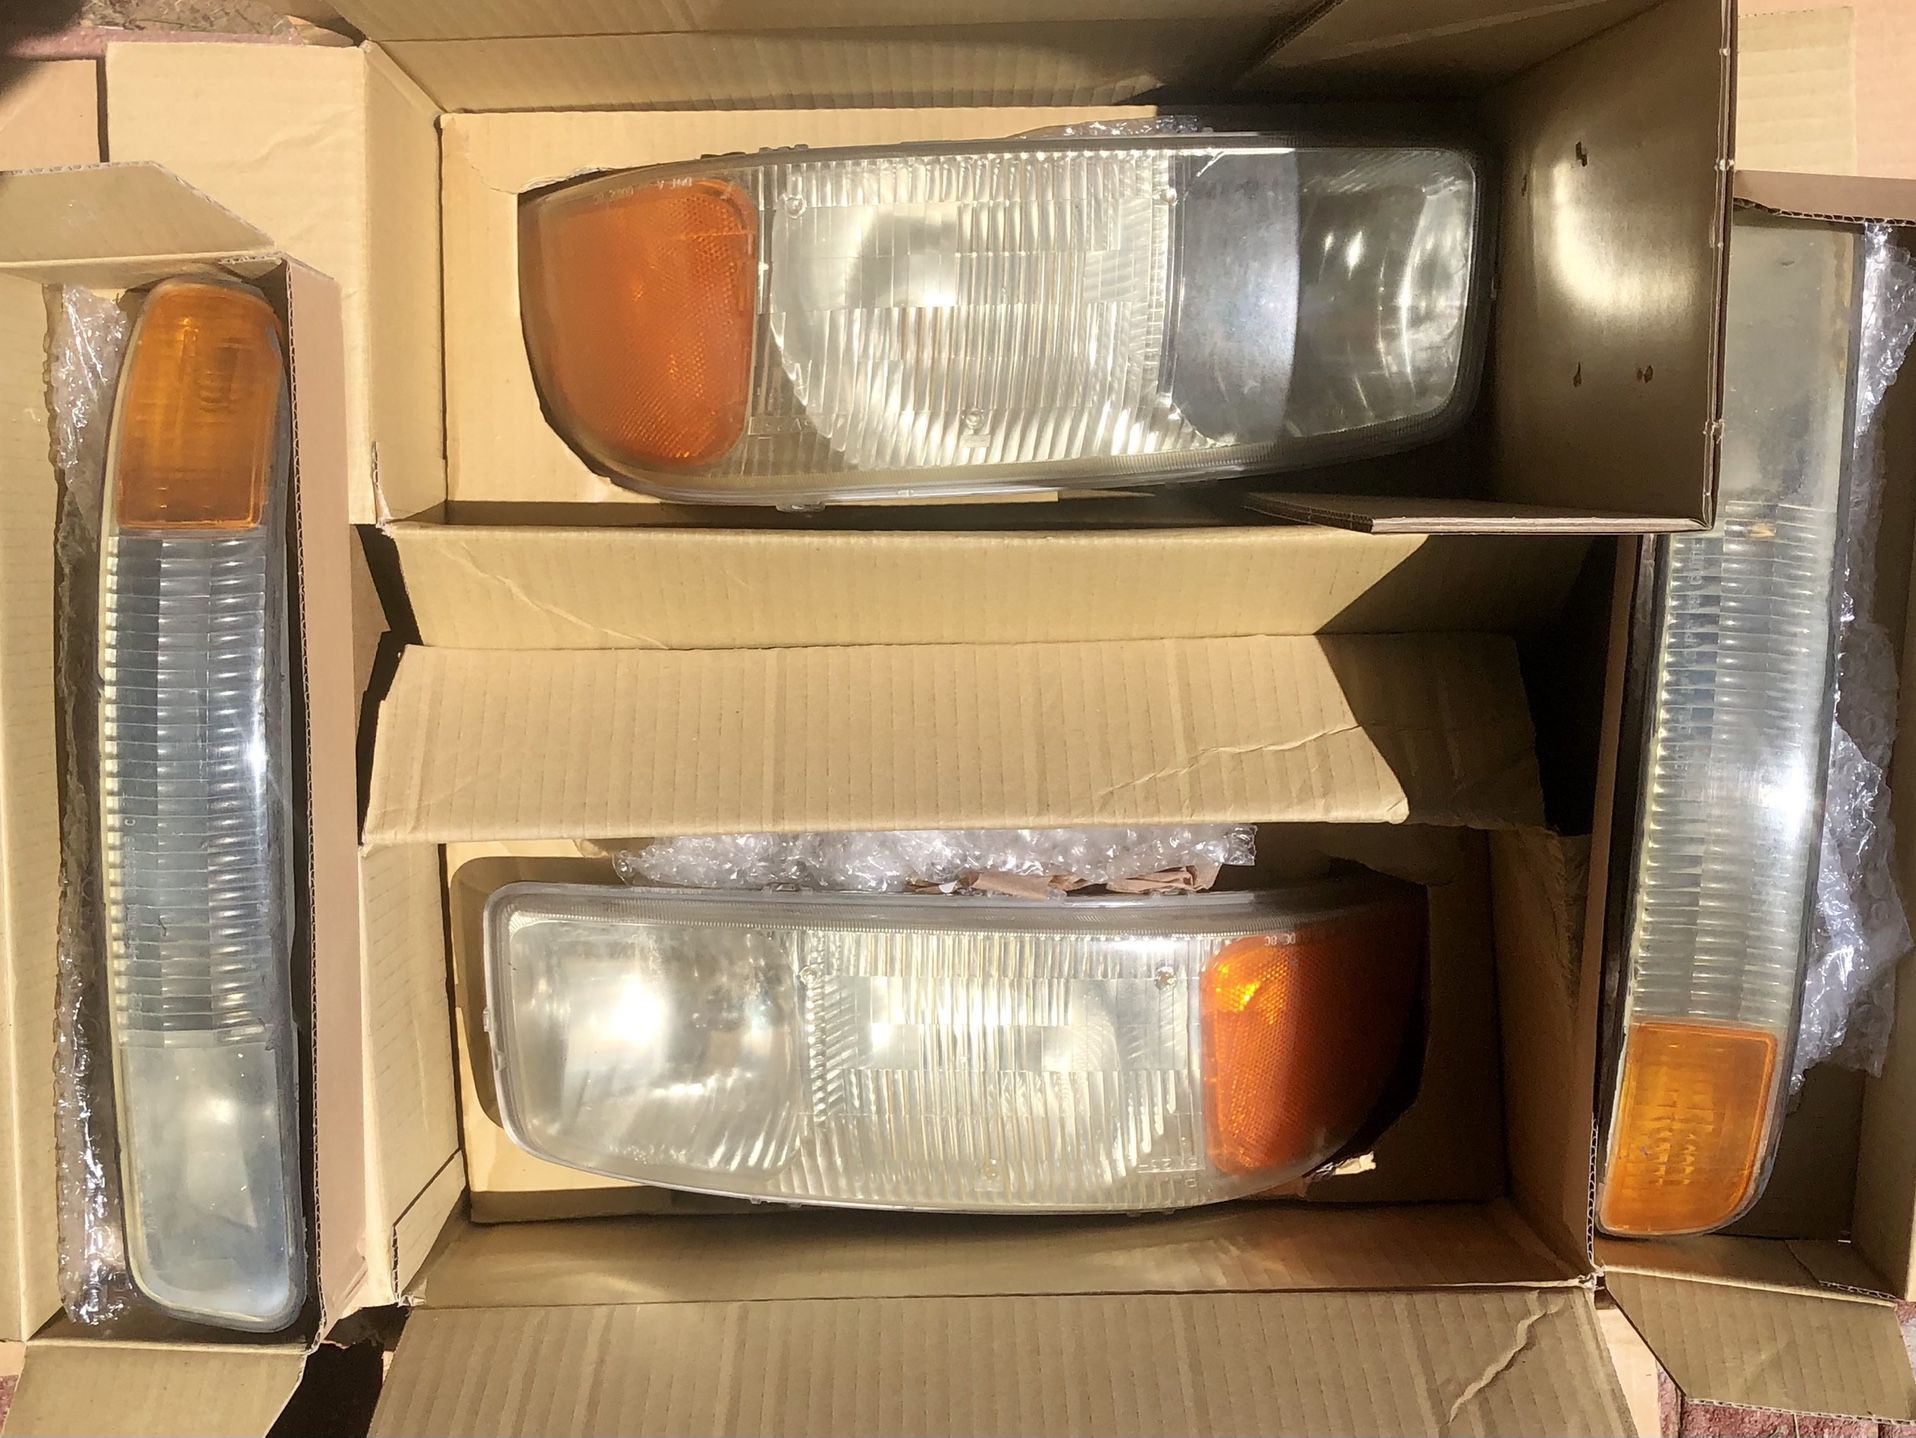  1(contact info removed) GMC Sierra Headlights And Signal Lights